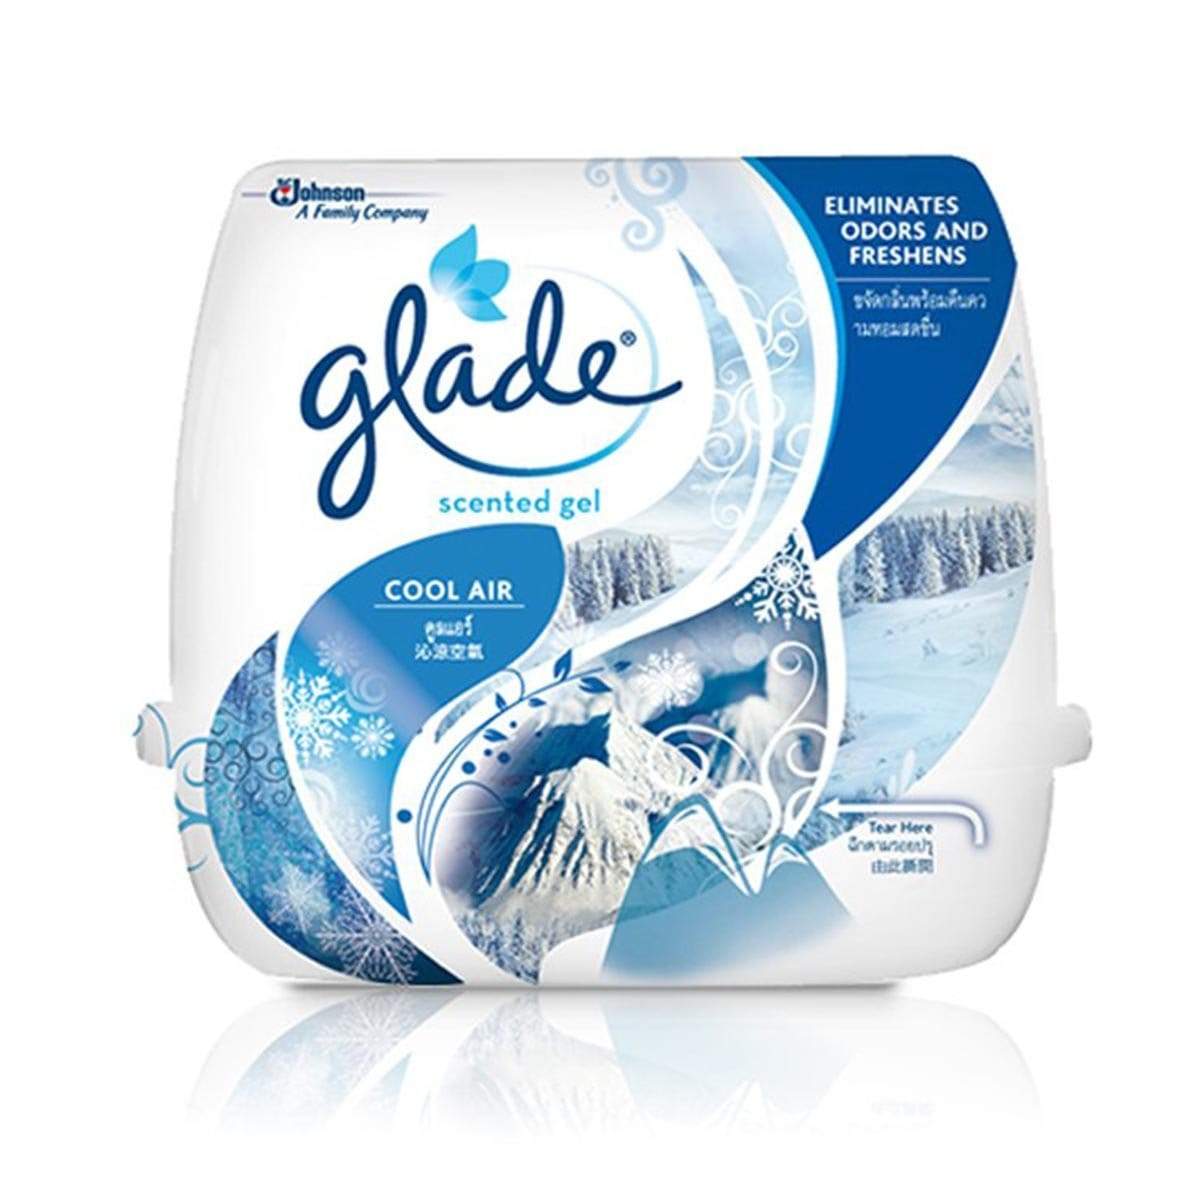 Glade Scented Gel Cool Air Air Freshener 180g